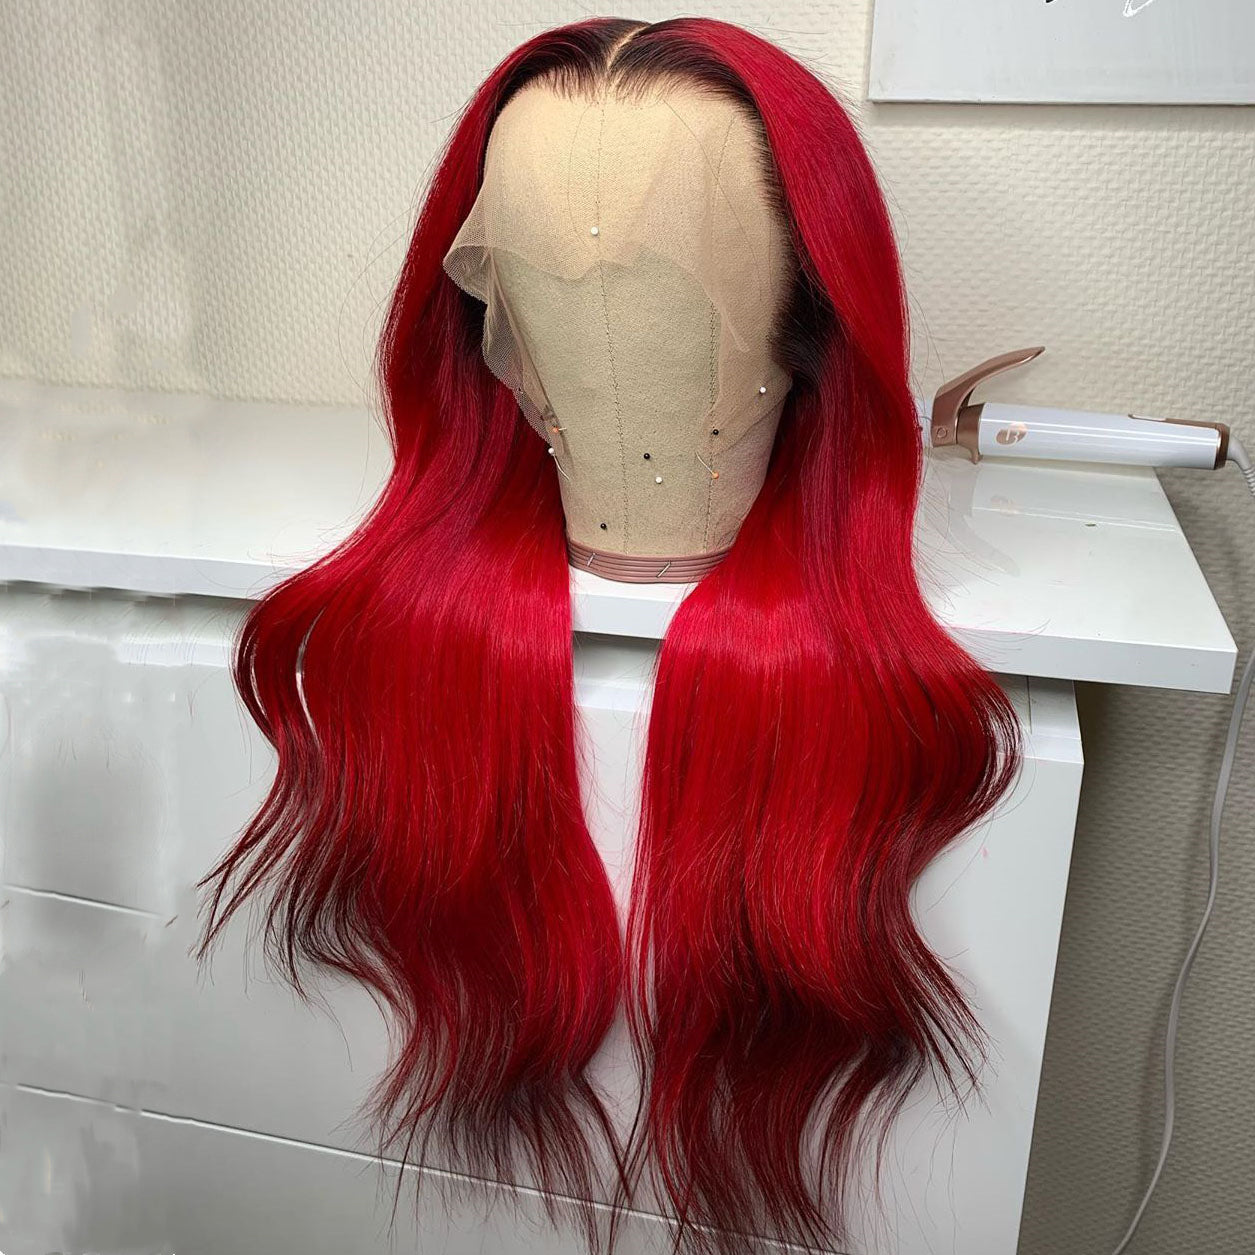 Peruvian Hair Lace Front Wig Red with Black Root Color Body Wavy Short Style